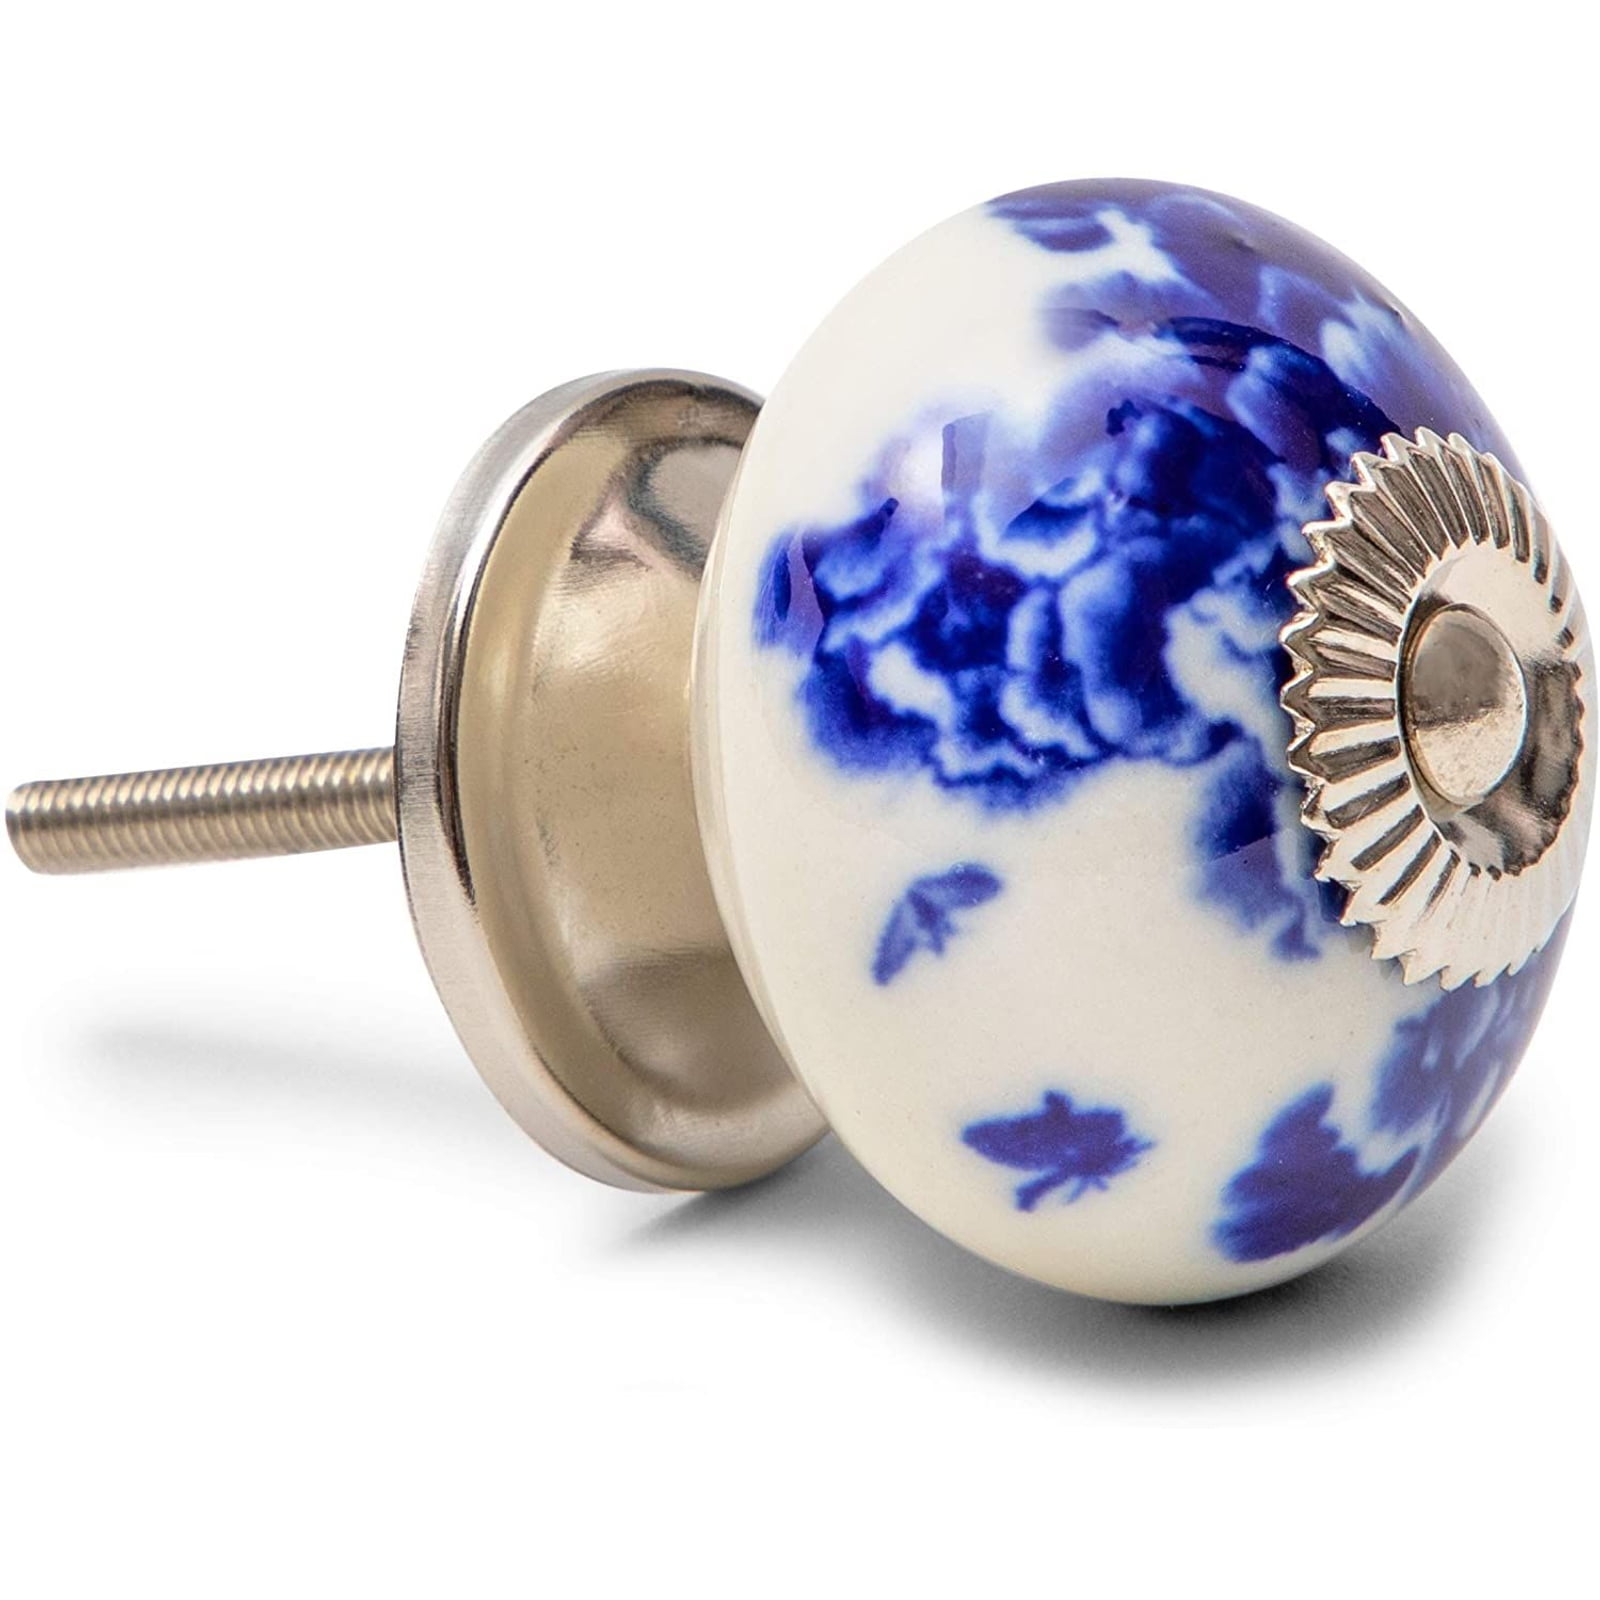 Kitchen Door Knobs for Wardrobes Cupboards Knobs Drawers Handles 6 pcs Mixed Vintage Ceramic Cabinet Knobs Blue on White Furniture Knobs & Handles